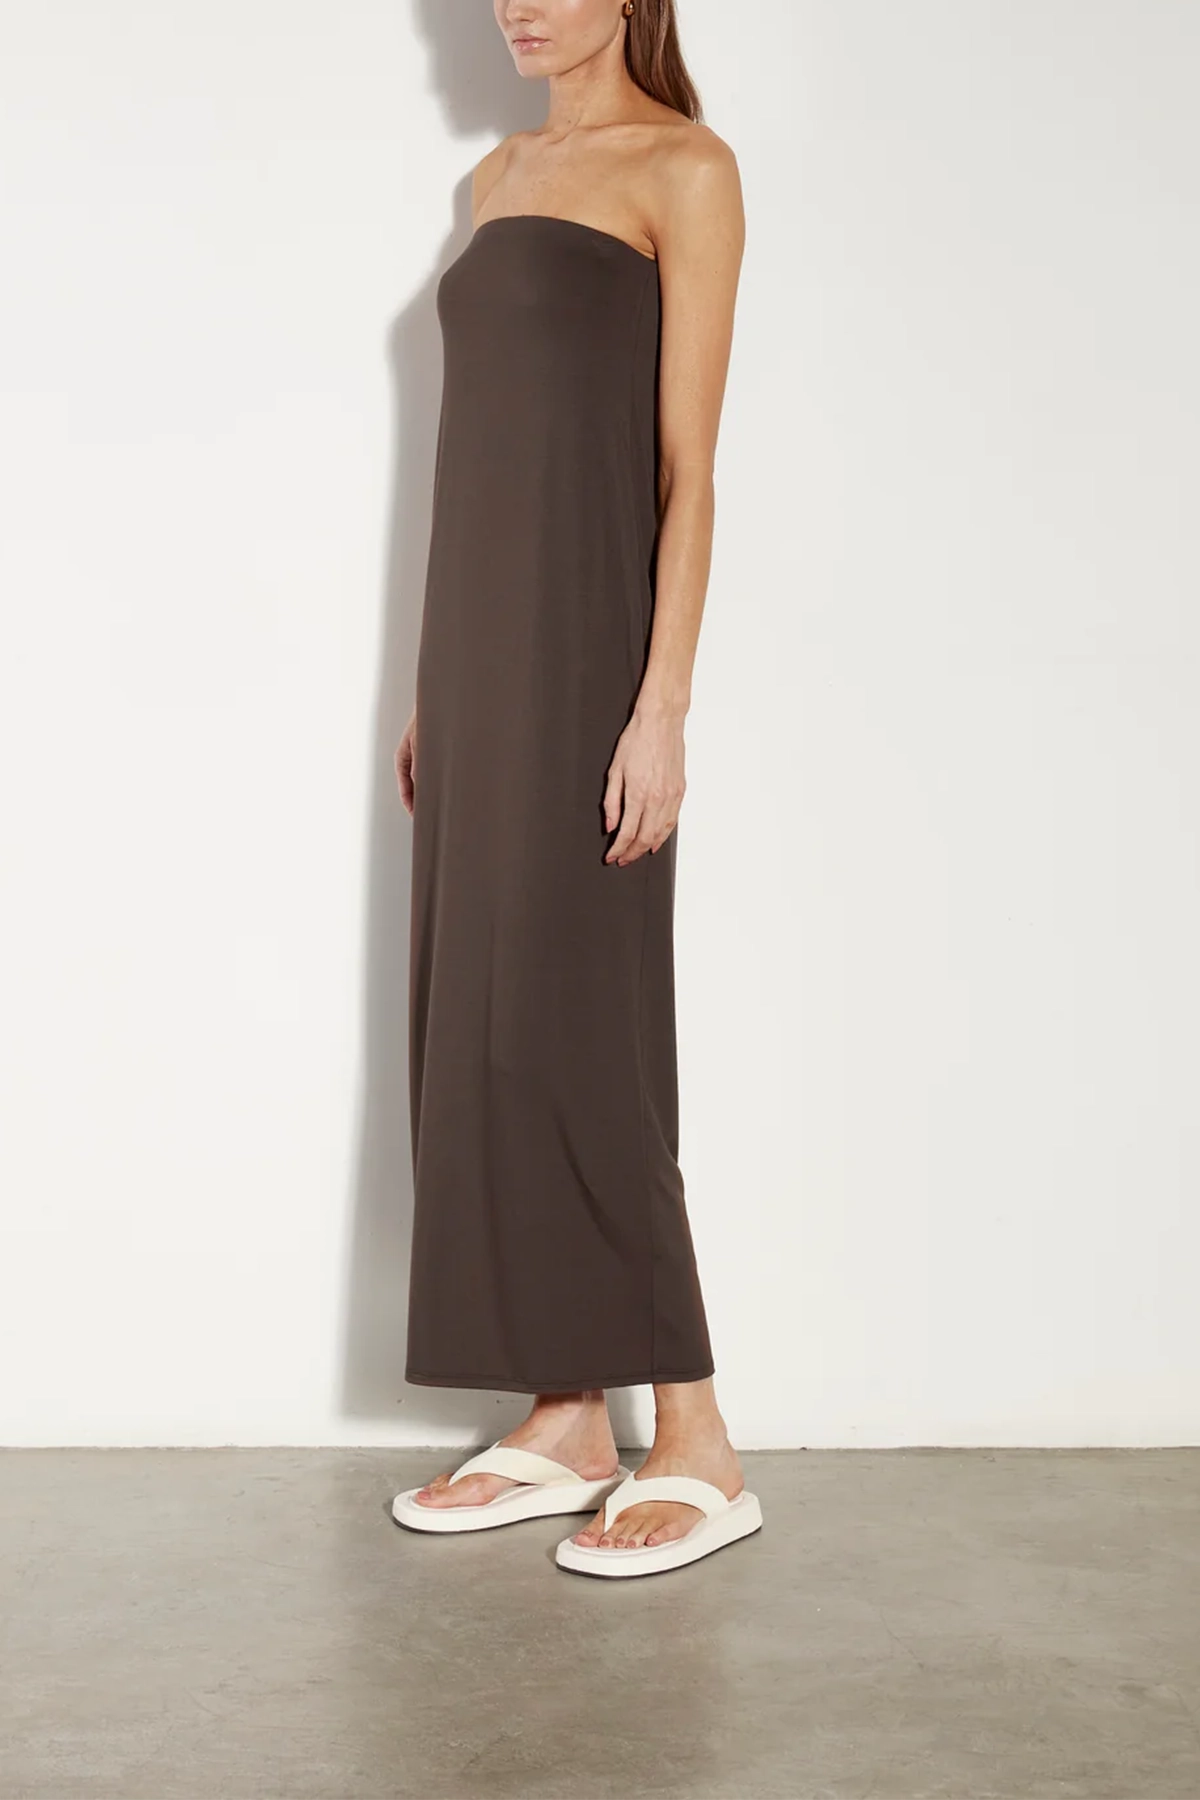 Enza Costa Luxe Knit Strapless Maxi Dress